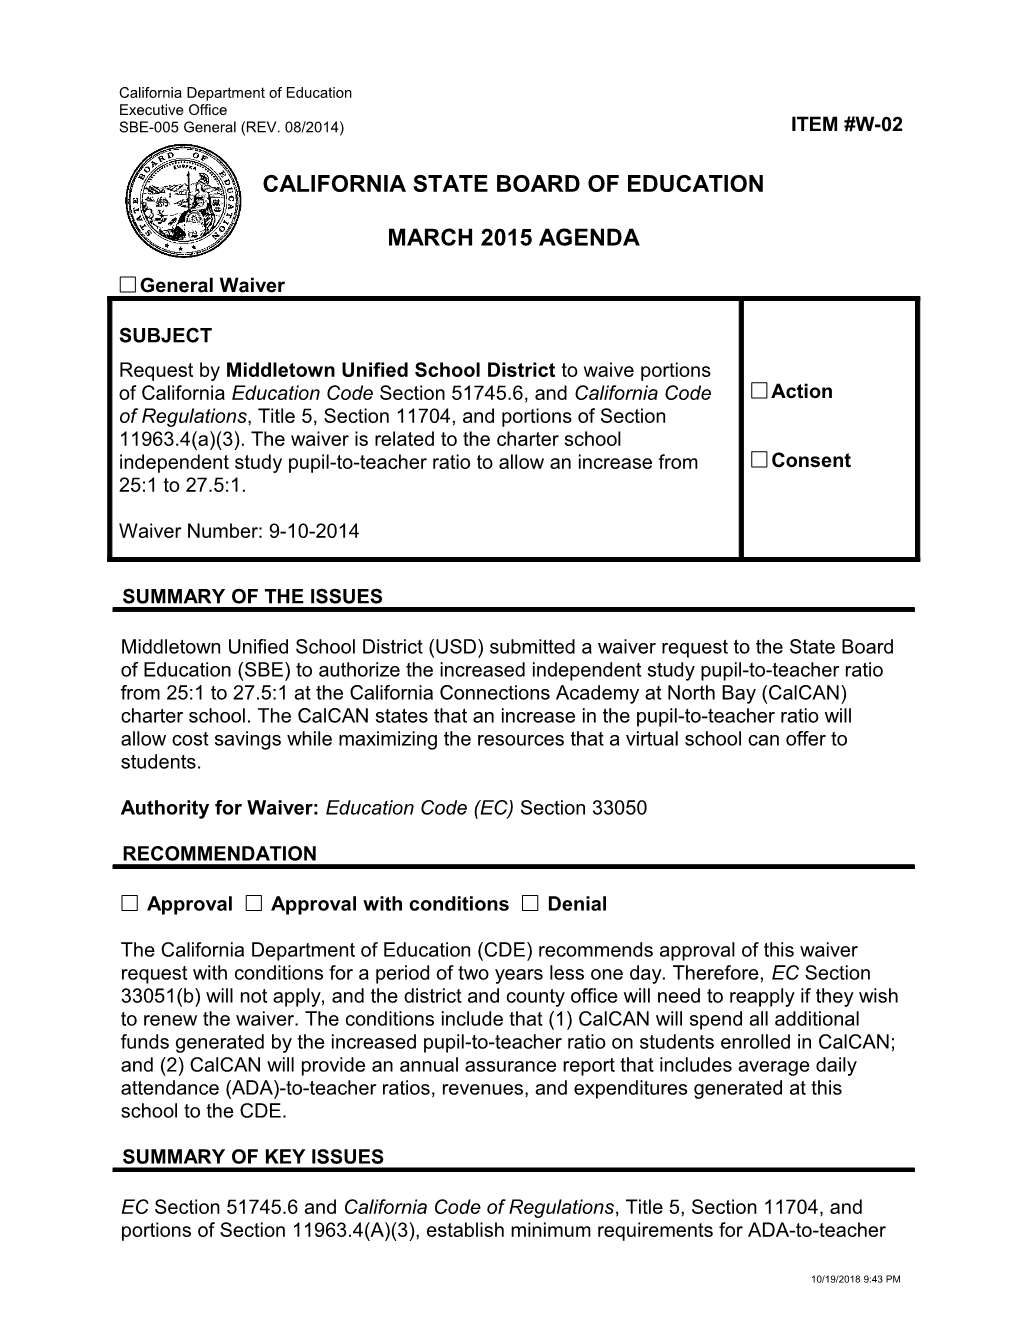 March 2015 Waiver Item W-02 - Meeting Agendas (CA State Board of Education)